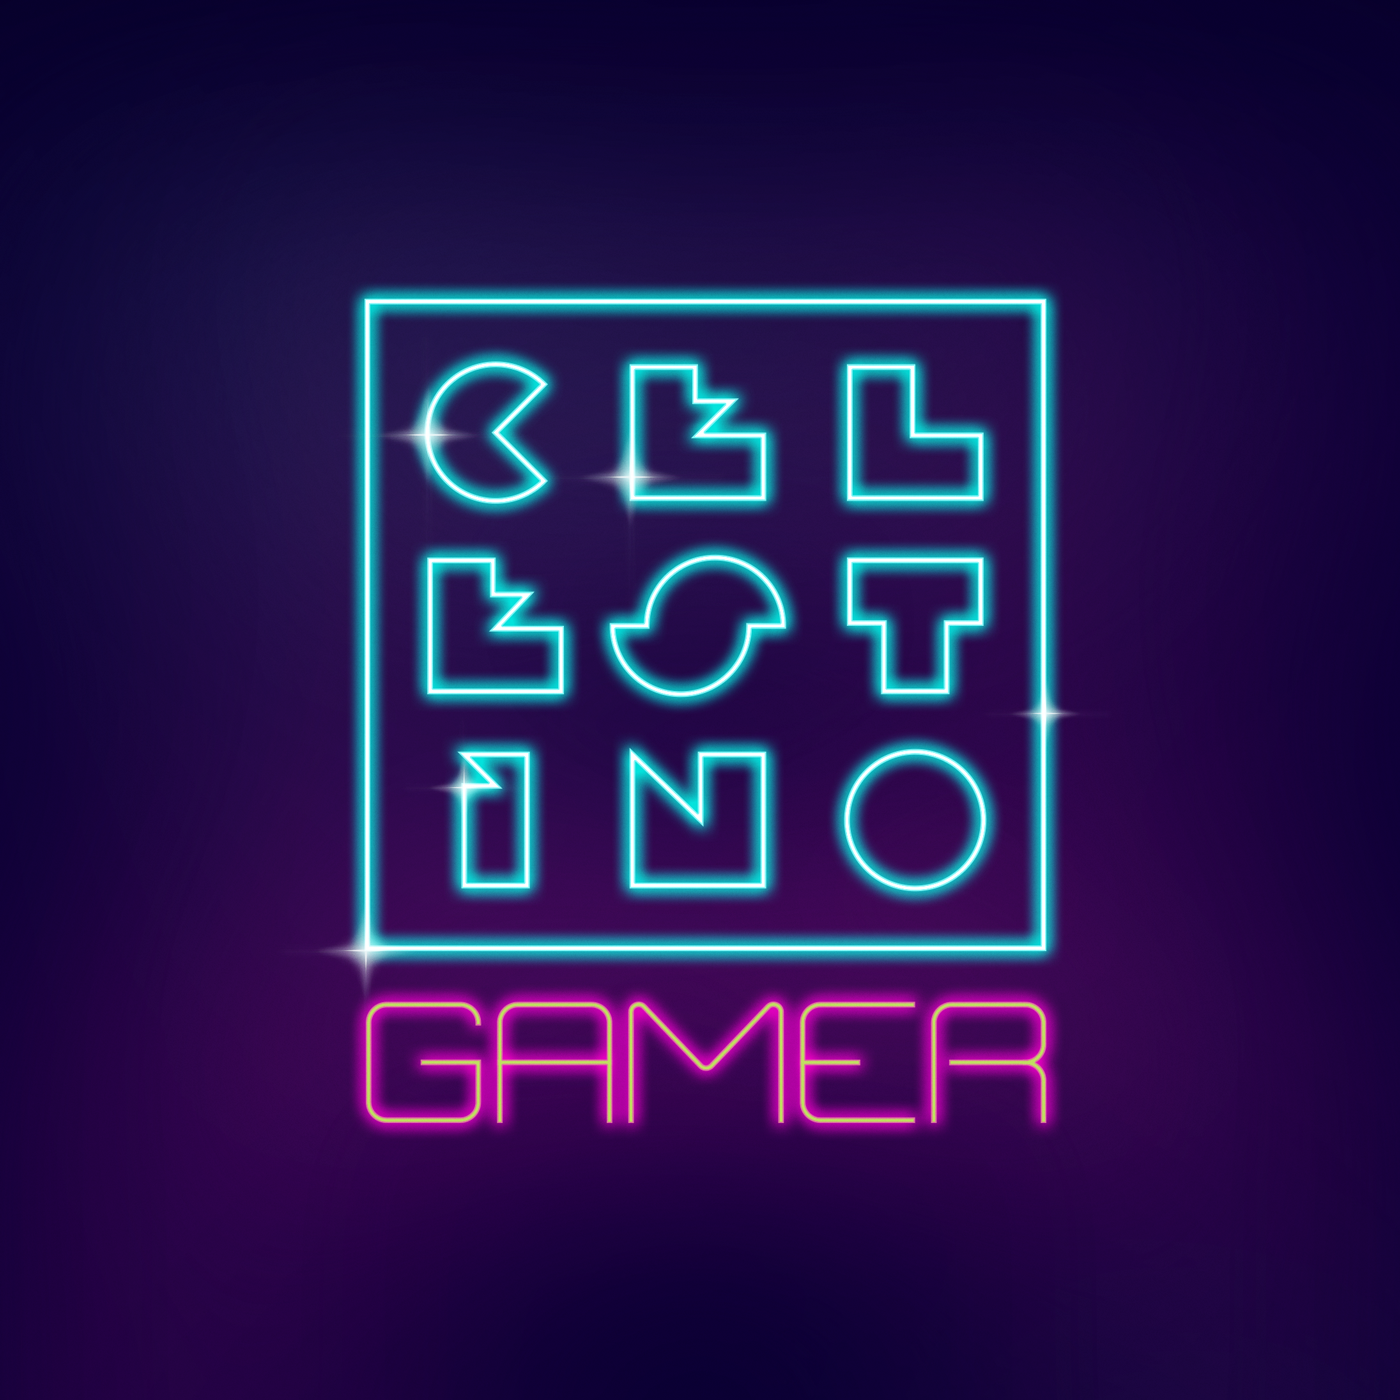 typography_lettering_andre_levy_zhion_vector_dj_celestino_gamer_neon_retro_80s.png